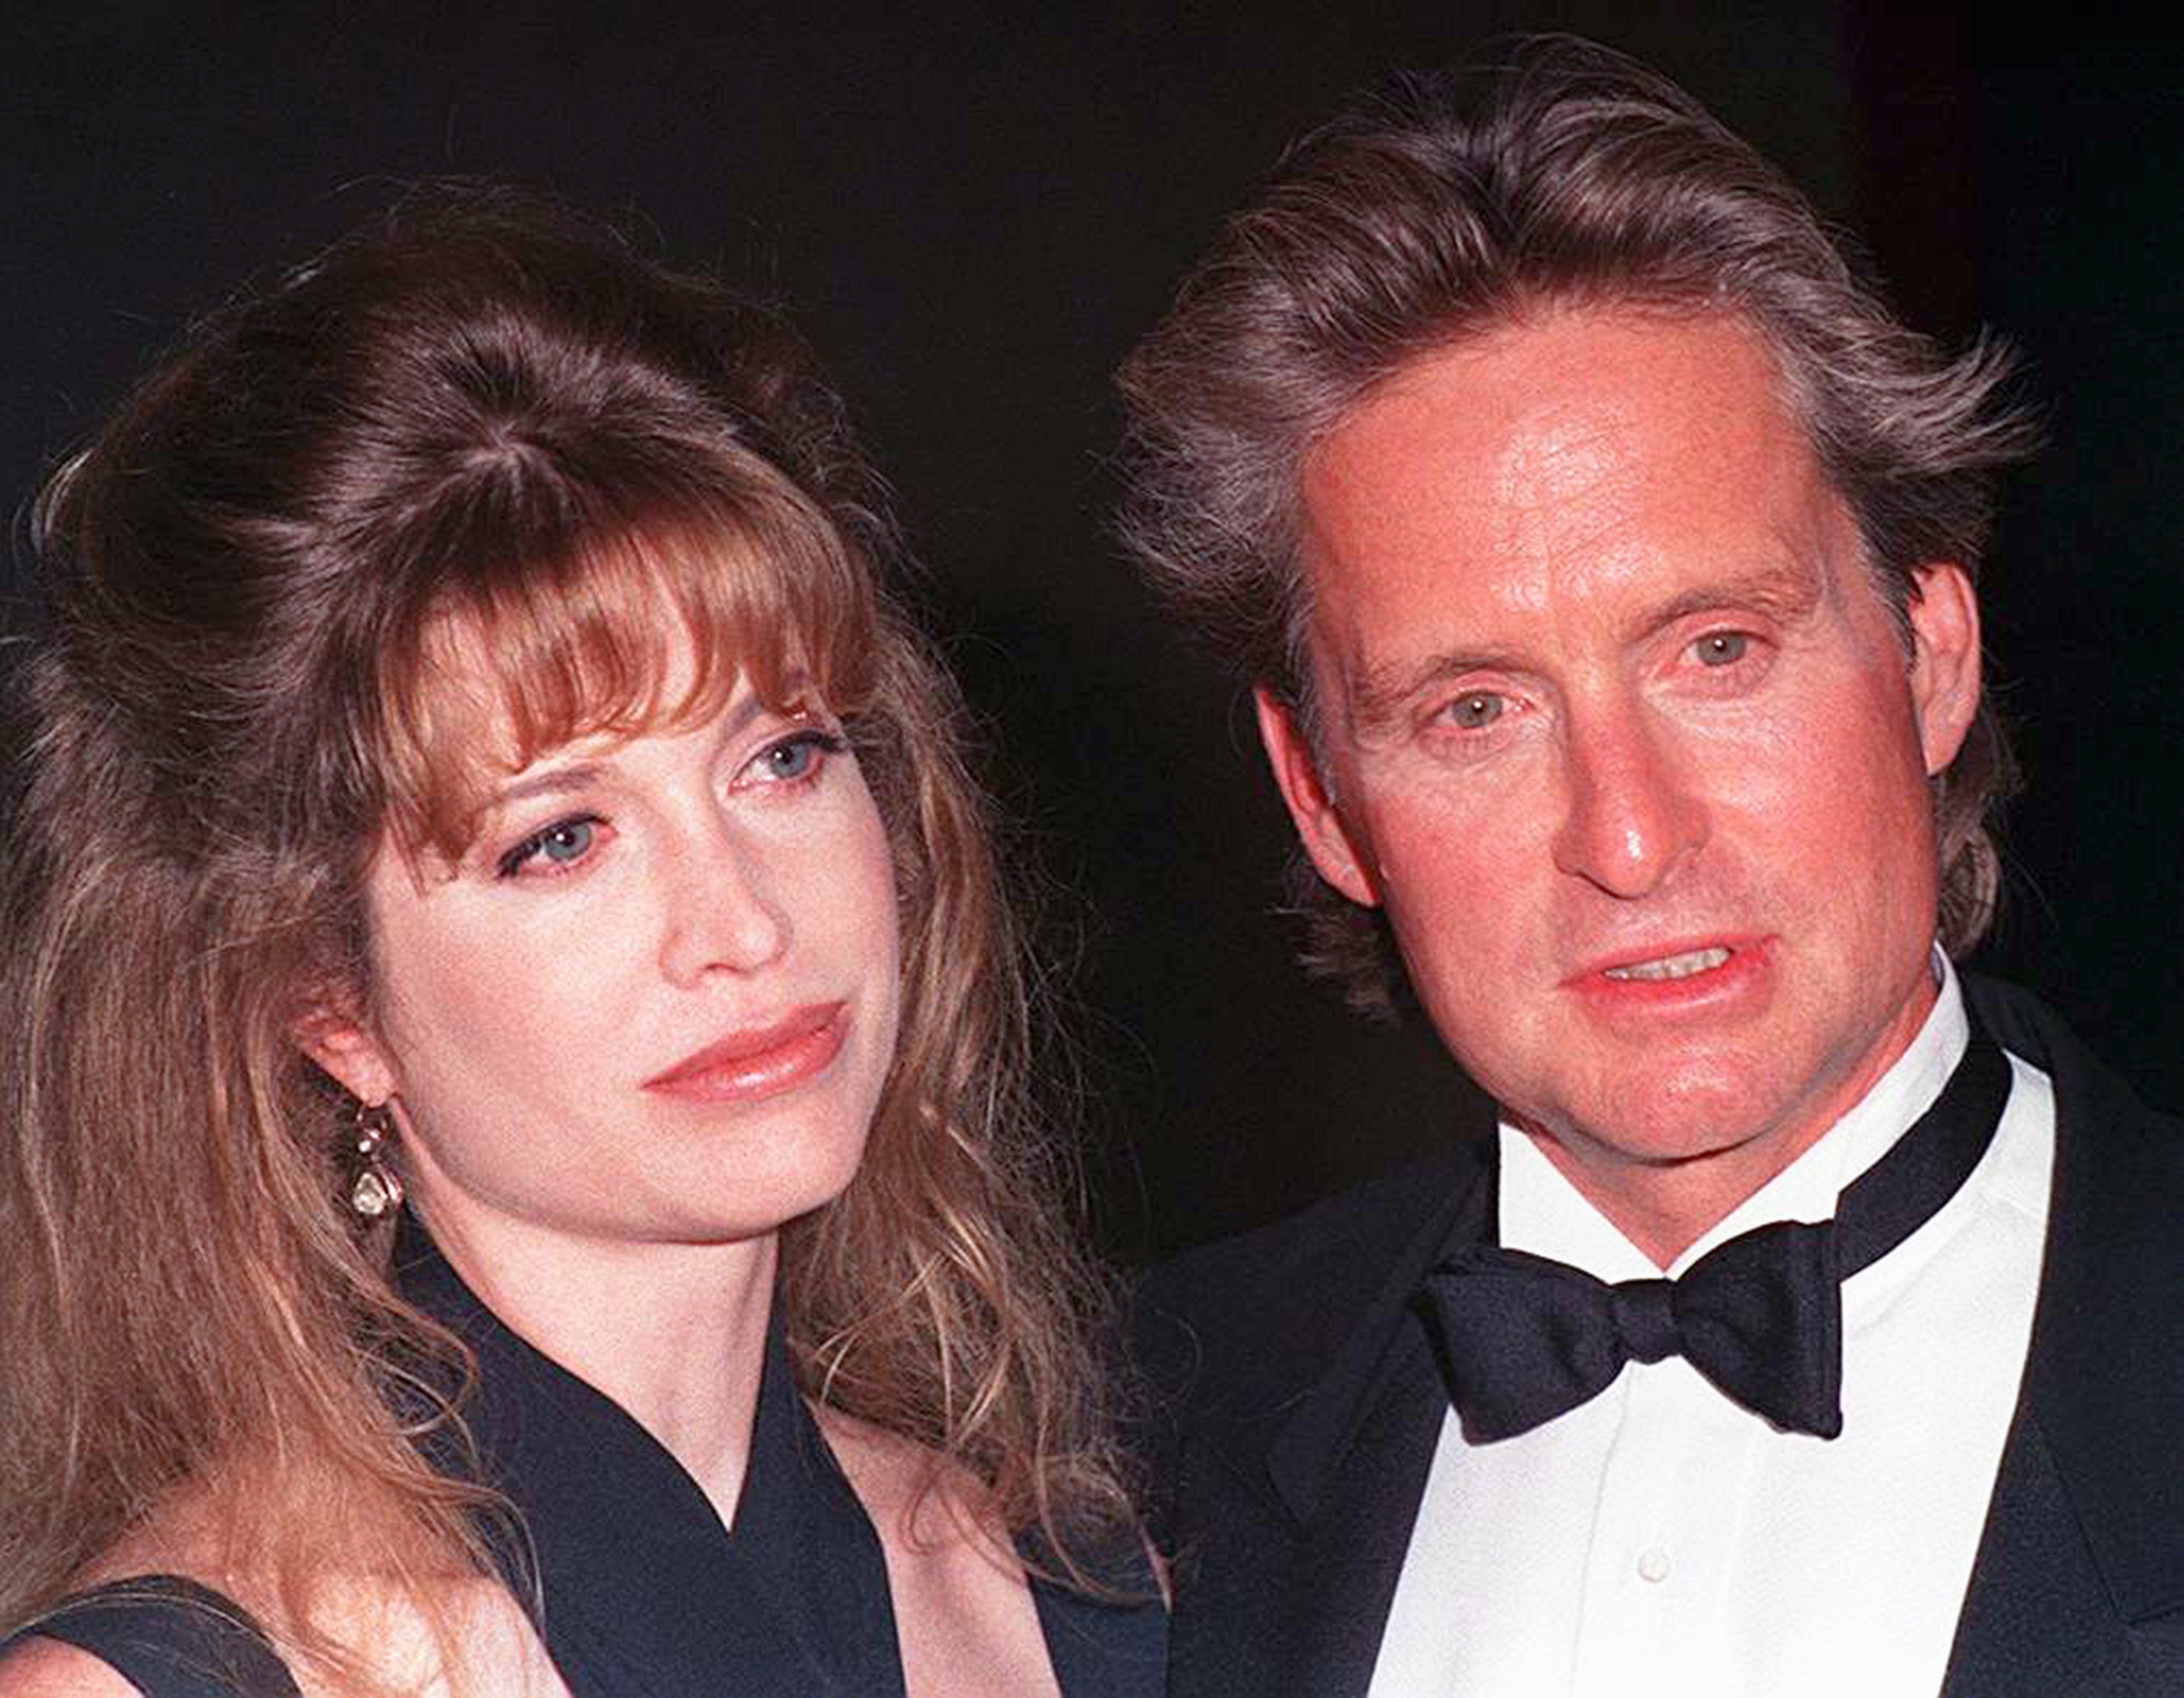 Diandra Luker and Michael Douglas at the 8th Annual Moving Picture Ball in Los Angeles, California on September 29, 1993 | Source: Getty Images